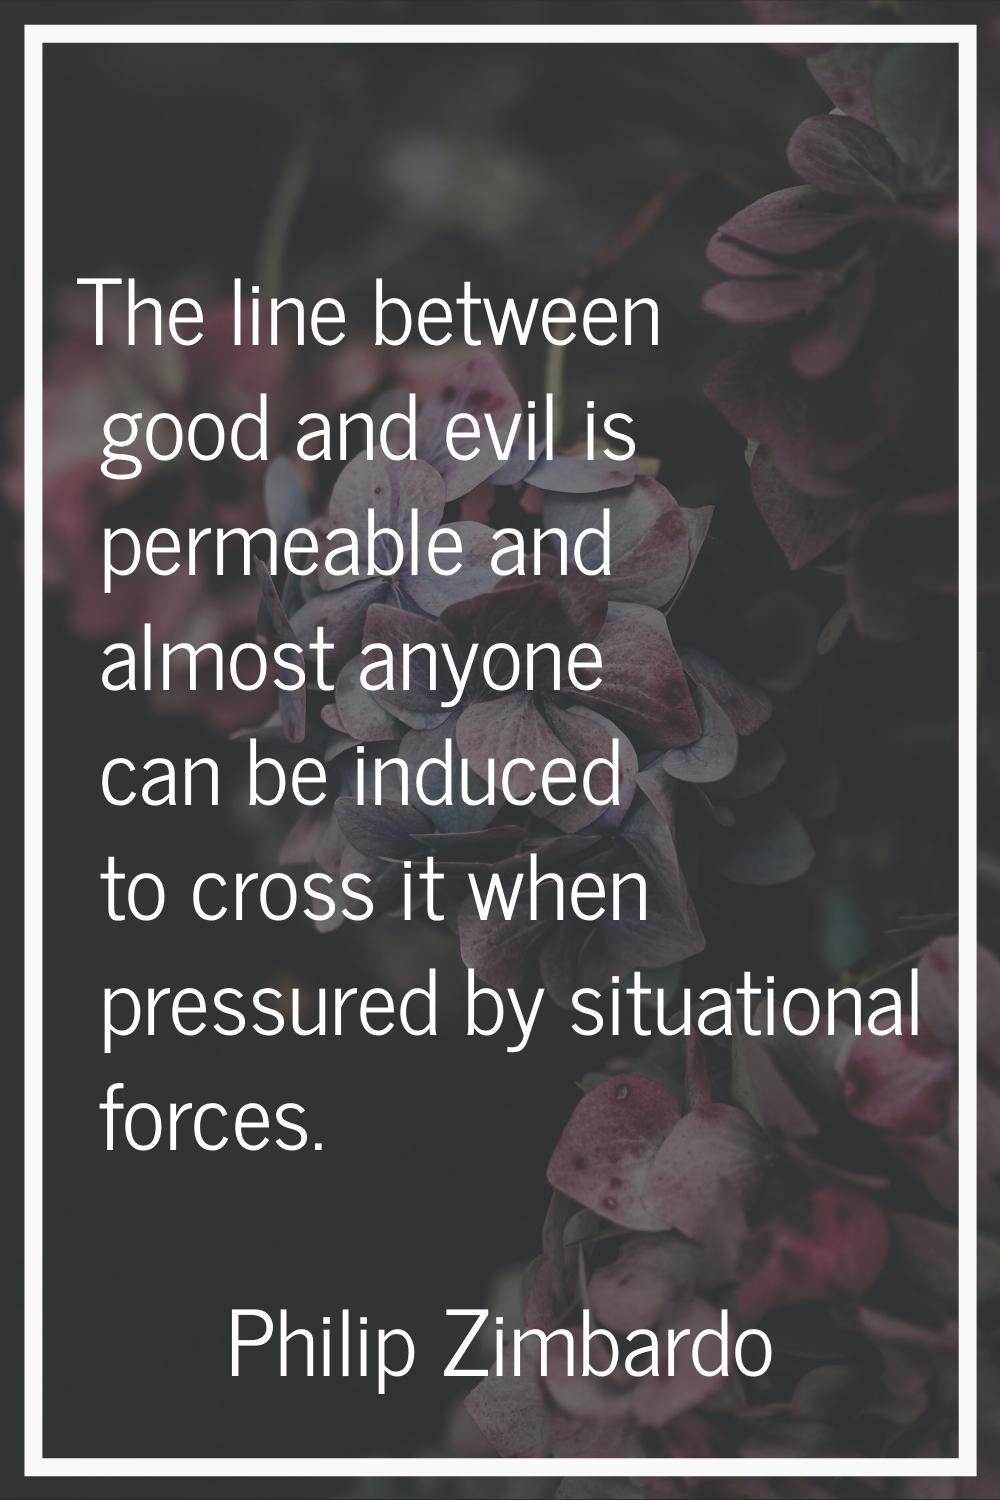 The line between good and evil is permeable and almost anyone can be induced to cross it when press